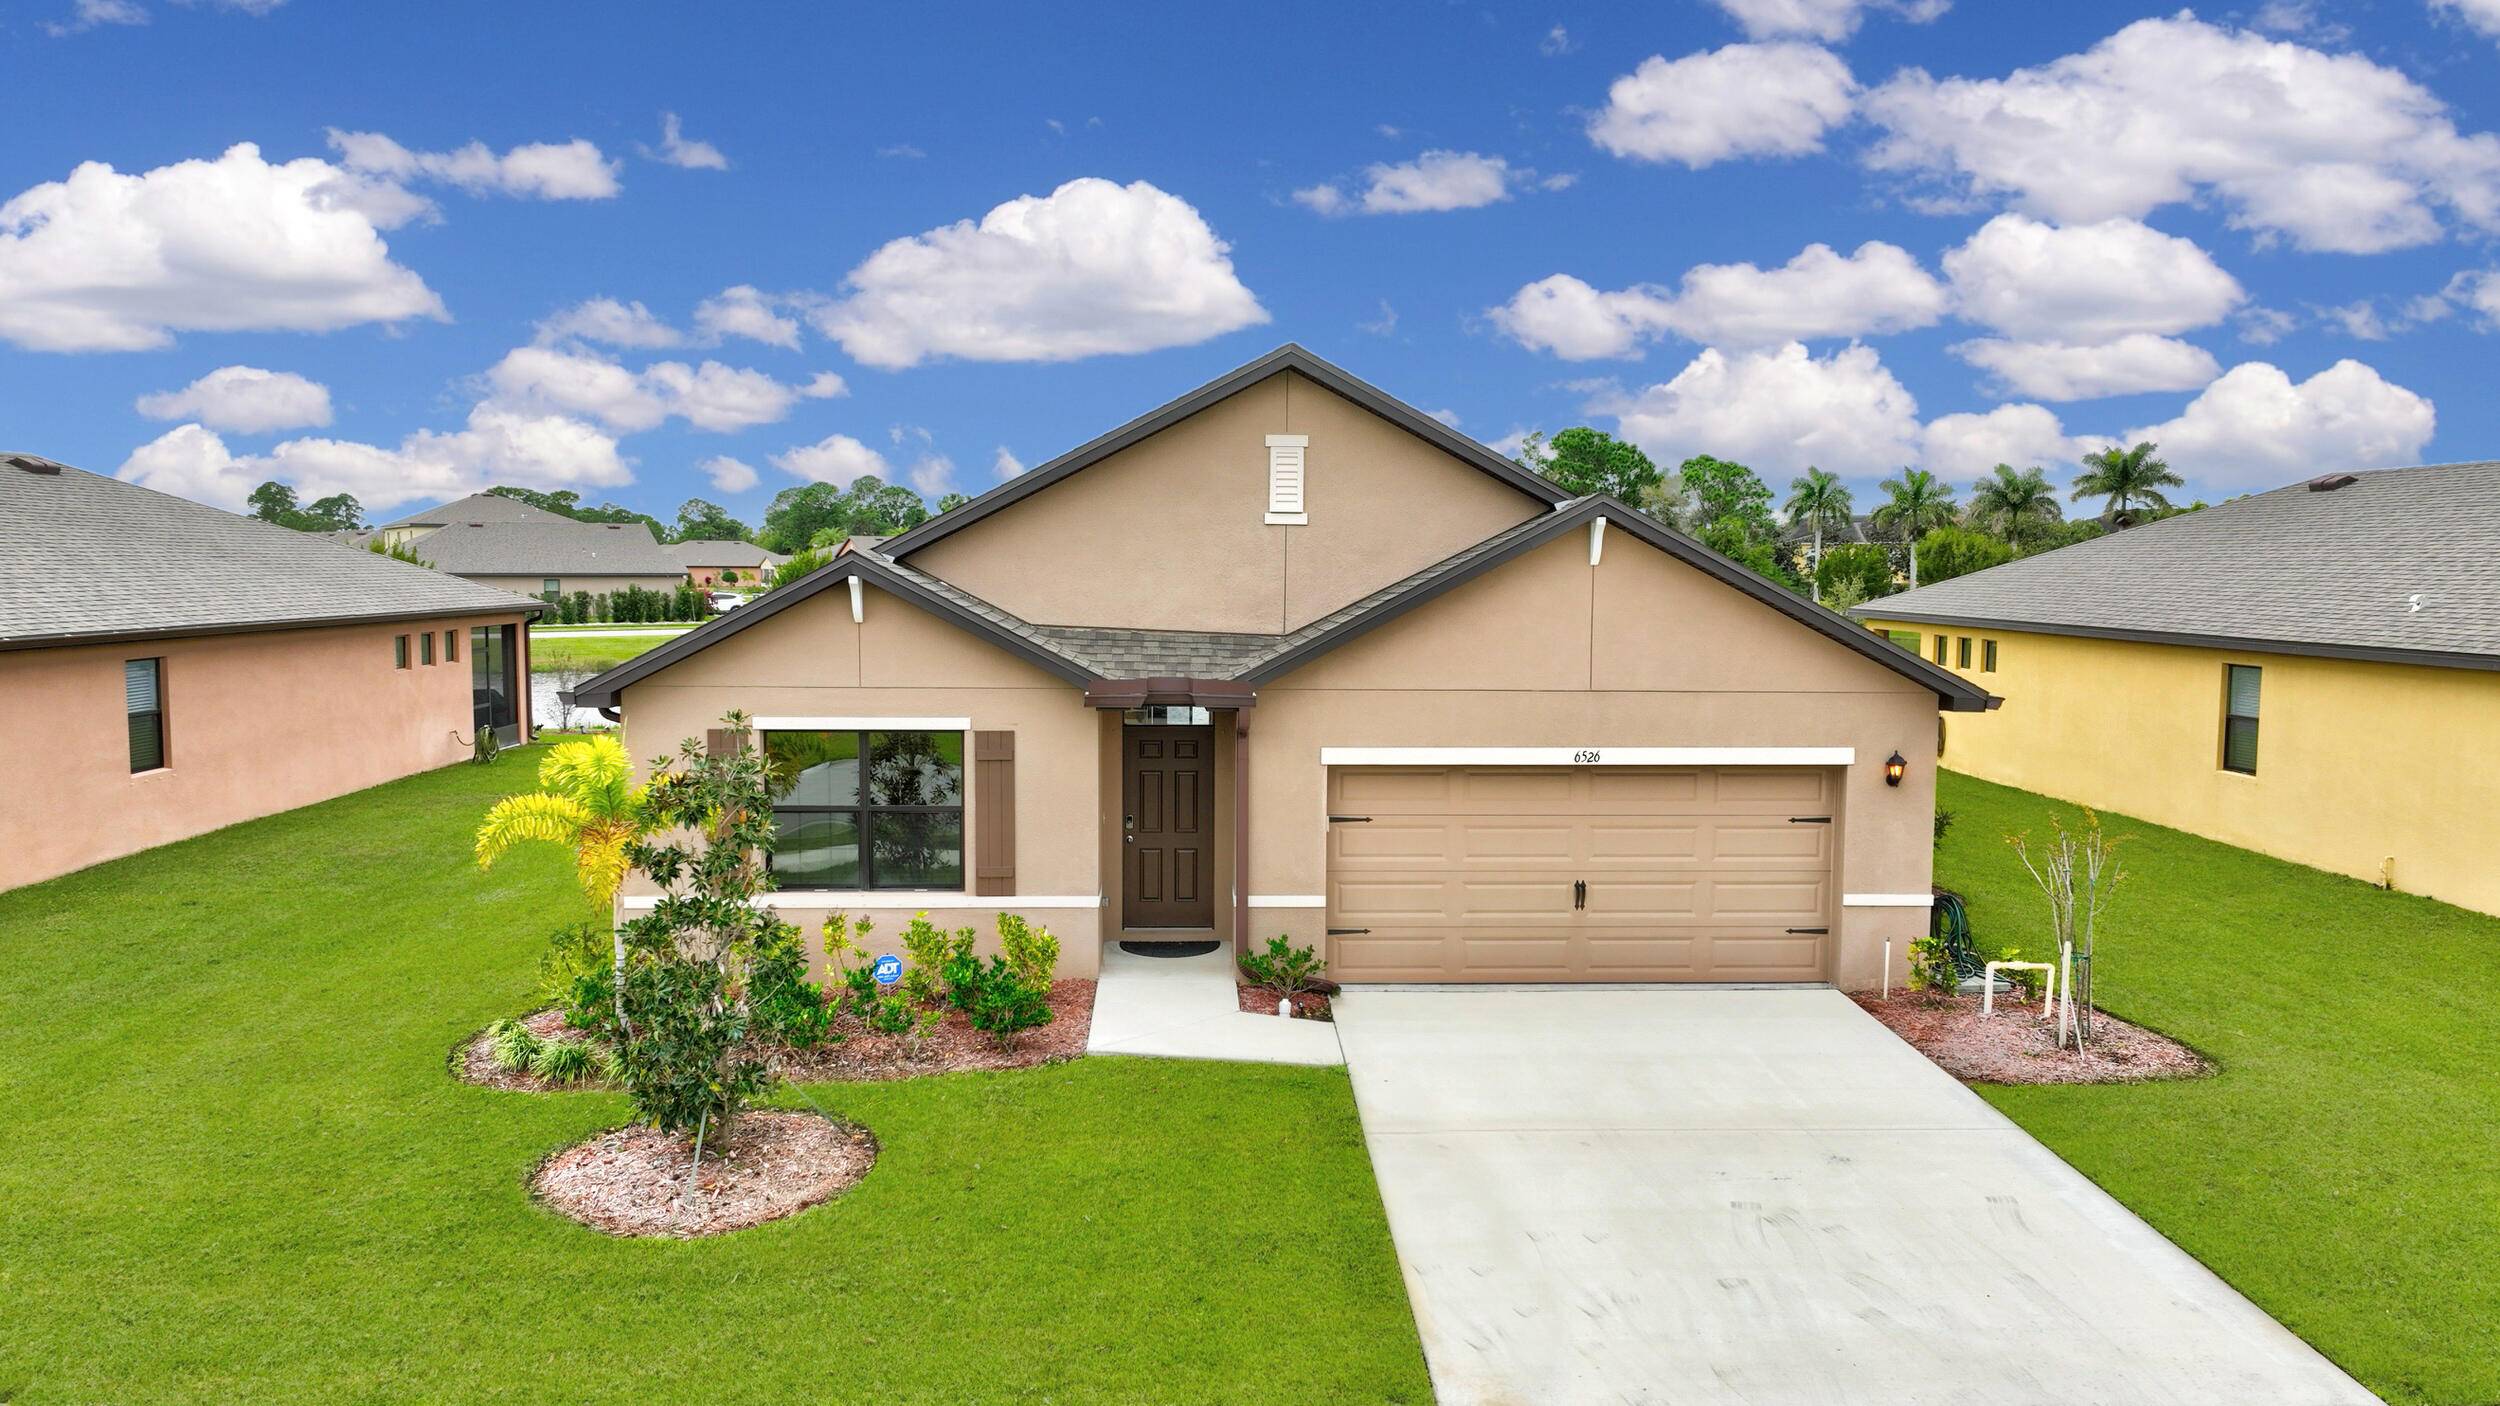 Stunning and well designed ranch layout featuring an expansive family room seamlessly connecting to a relaxed dining space and an open kitchen with a central island.